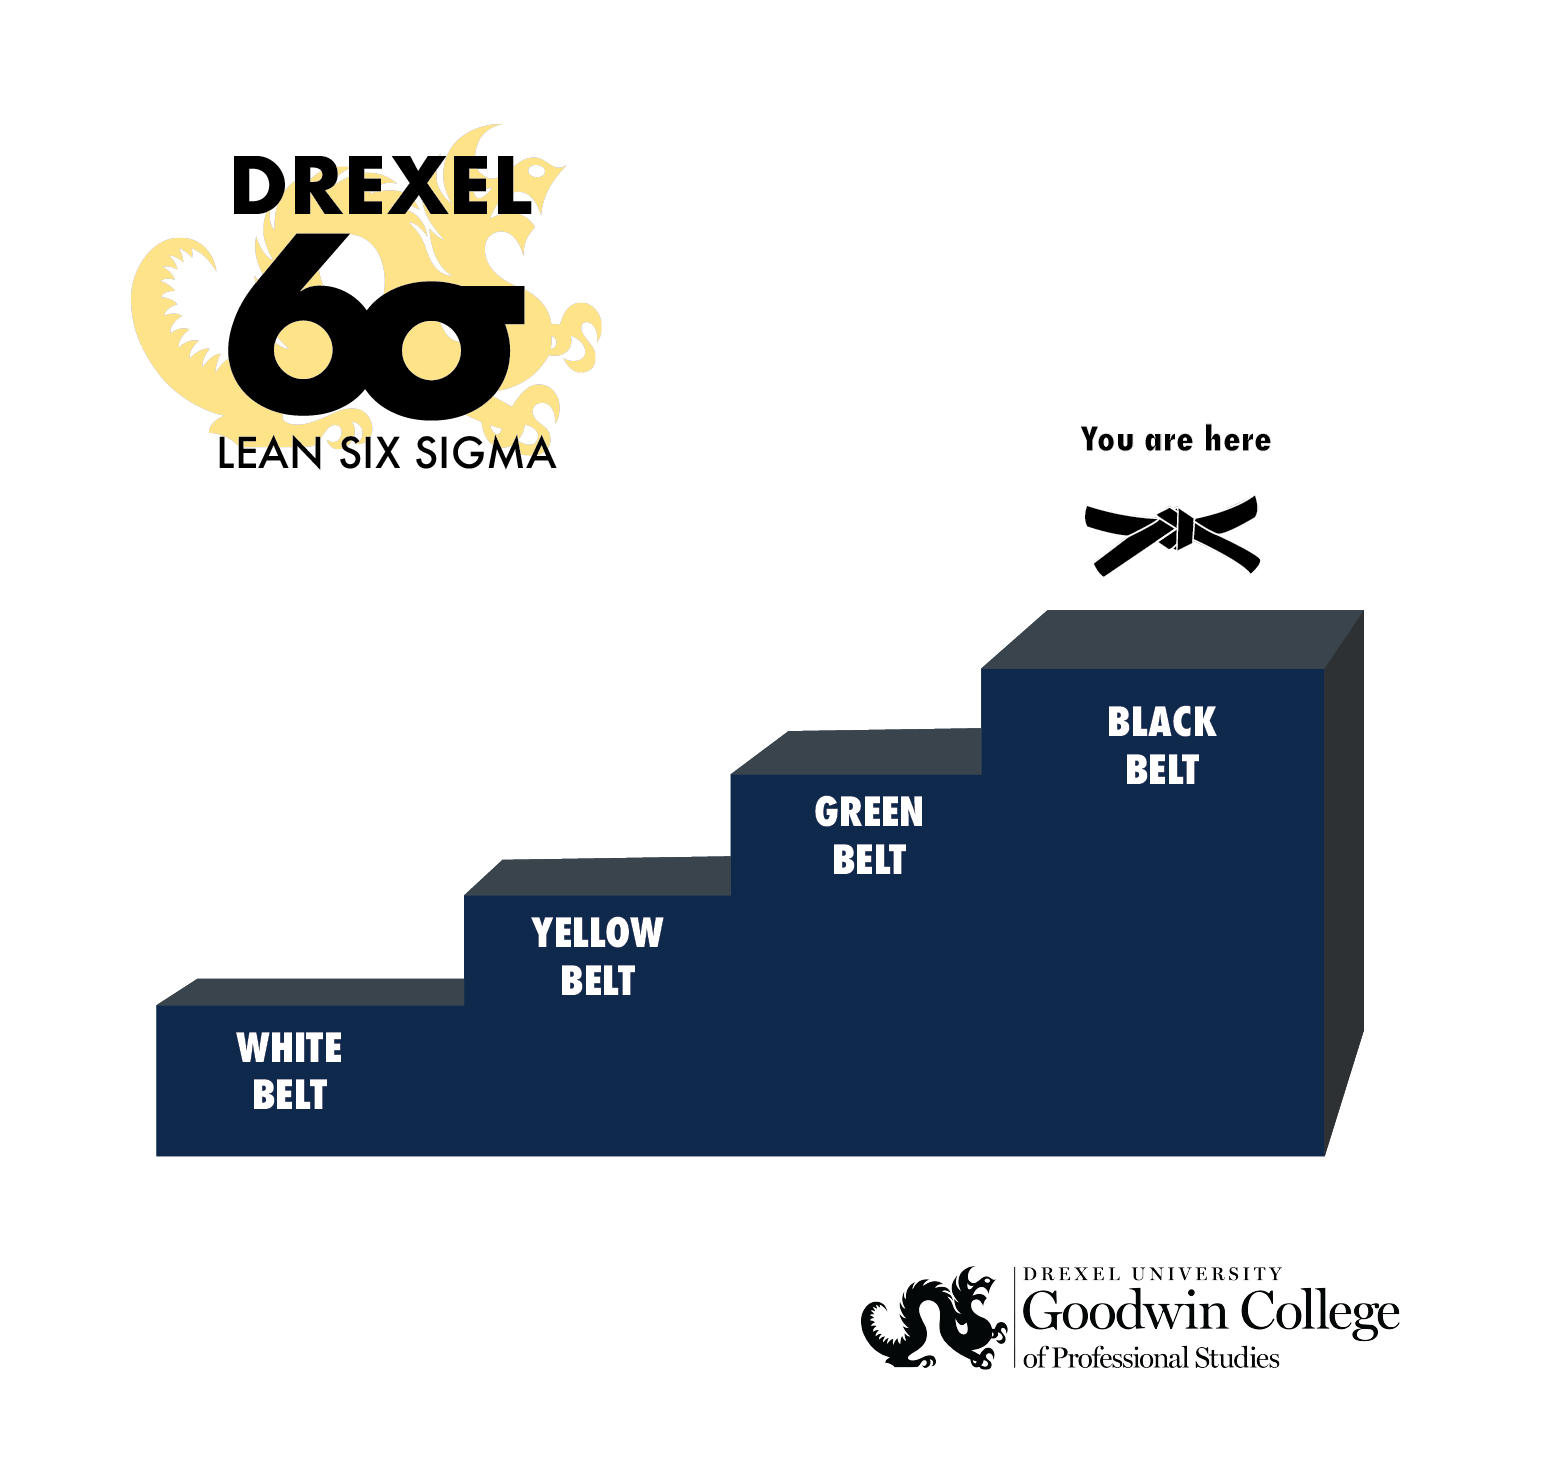 Lean Six Sigma Ladder with "You are Here" on Black Belt step